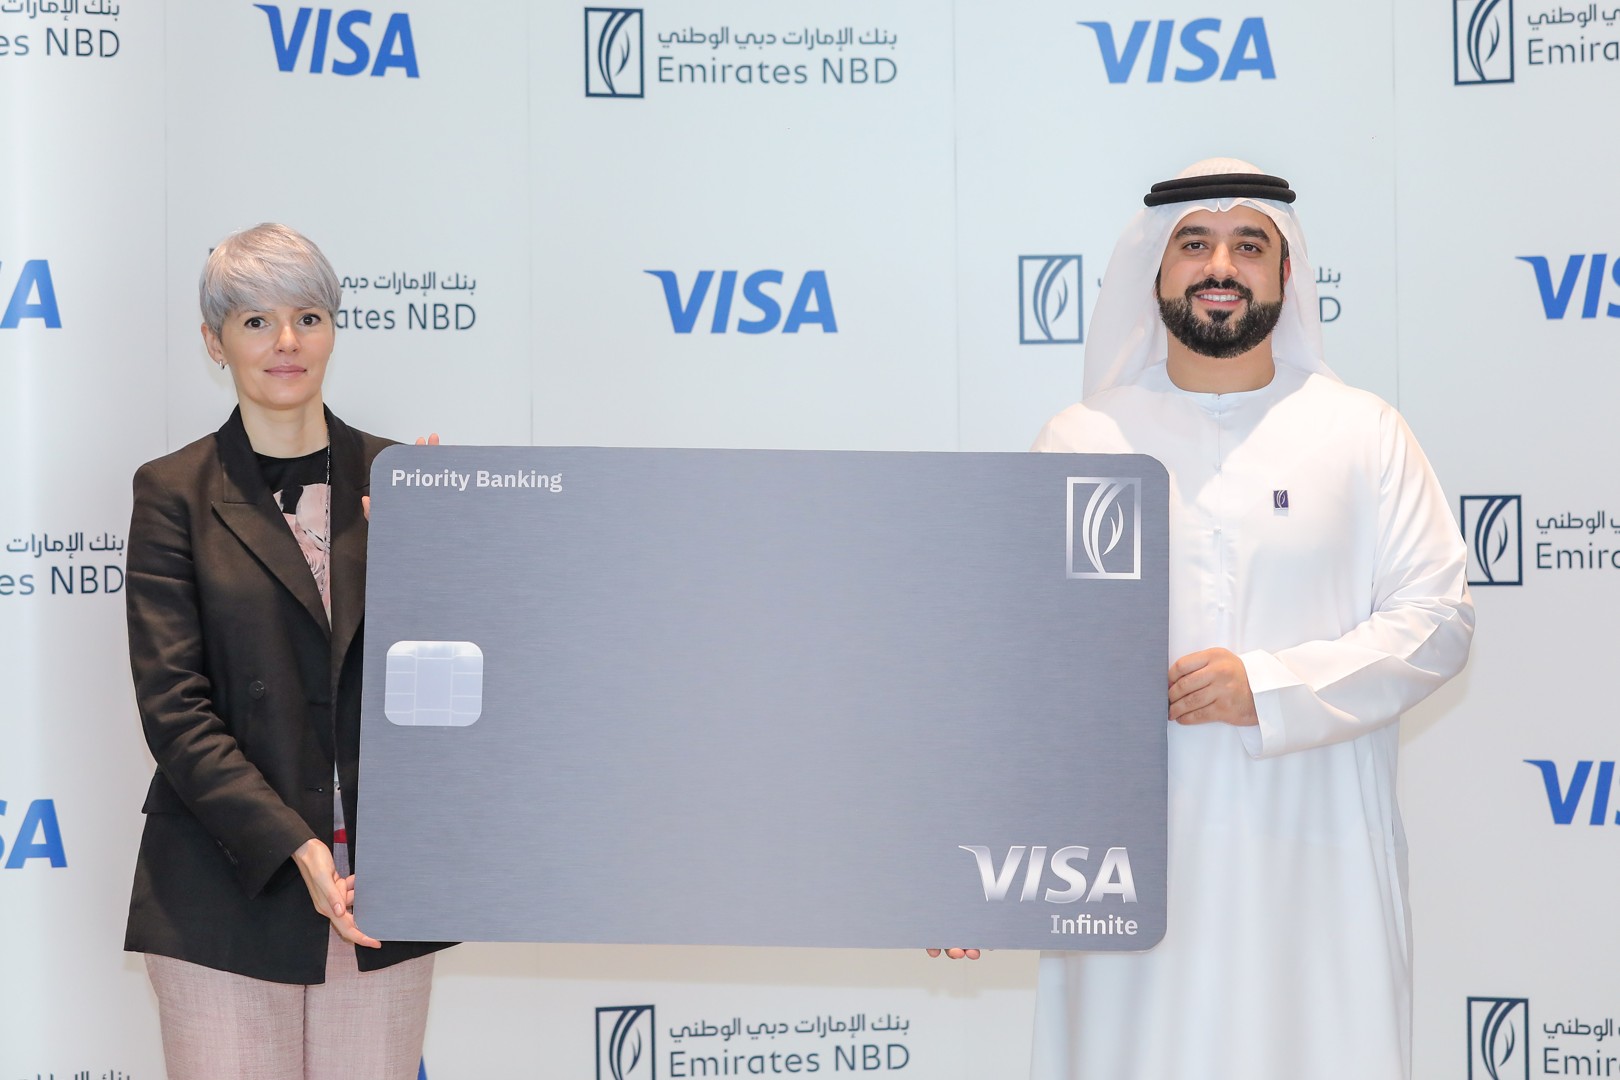 Photo: Emirates NBD launches Visa credit card for high-net-worth clientele offering premier lifestyle benefits